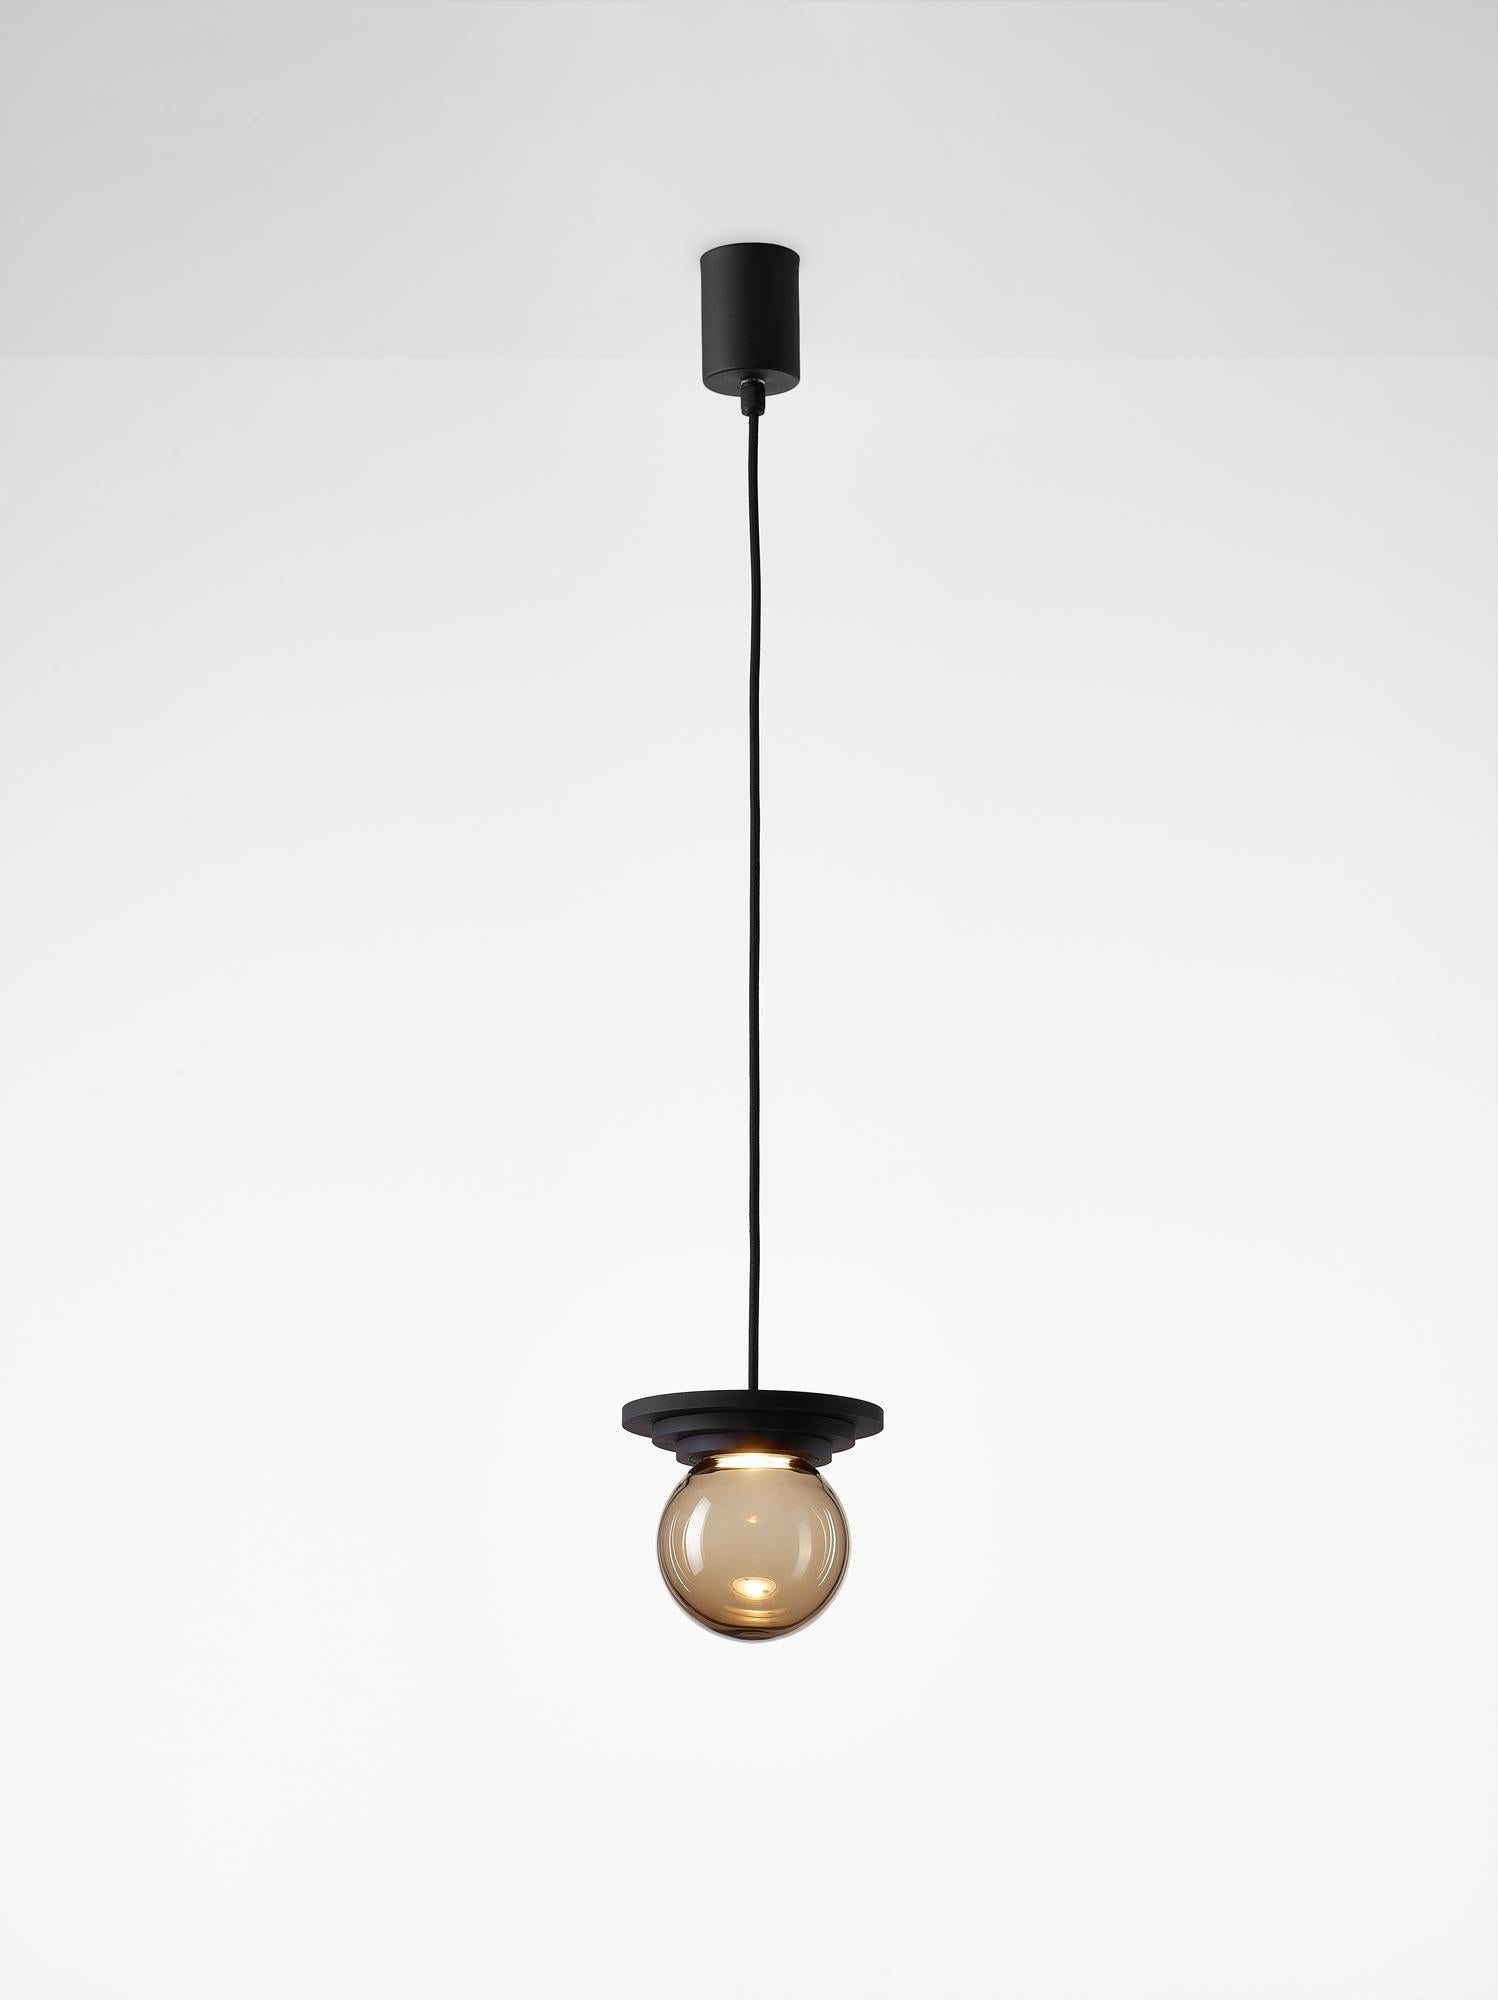 Set Of 2 Black Stratos Mini Ball Pendant Light by Dechem Studio
Dimensions: D 12 x H 14 cm
Materials: Aluminum, Glass.
Also Available: Different colours available,

Different shapes of capsules and spheres contrast with anodized alloy fixtures,